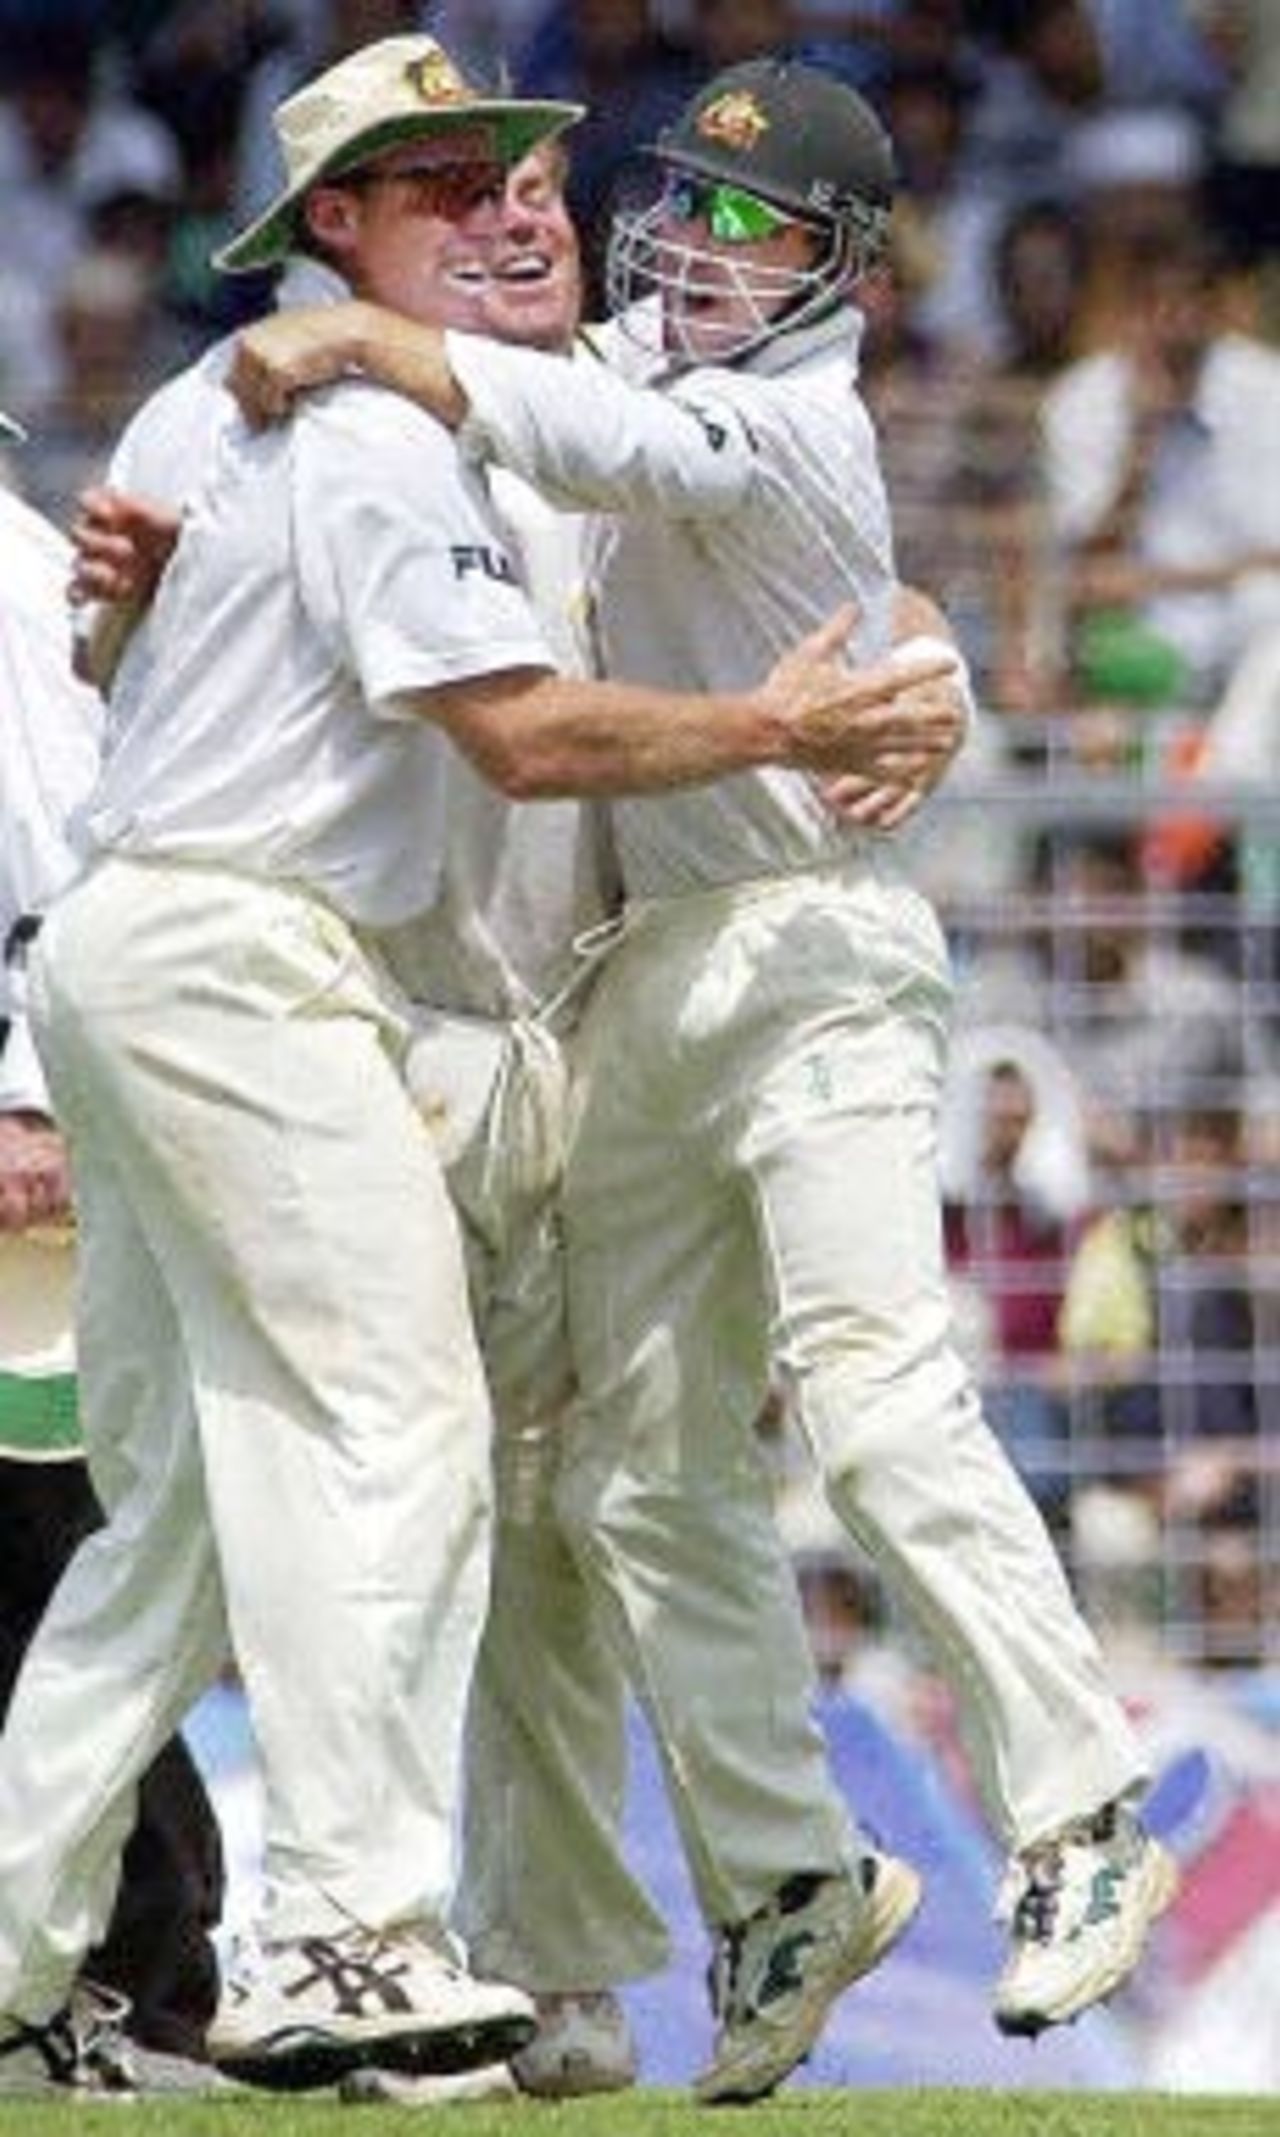 Australian players Glenn McGrath (L), Shane Warne (C), and Justin Langer celebrate the dismissal of Indian captain Sourav Ganguly (not in the picture) during the third day's play of the first Test match between India and Australia at the Wankhede stadium in Mumbai 01 March 2001. India were in deep trouble at 216 for 9 after tea and face an almost certain defeat.